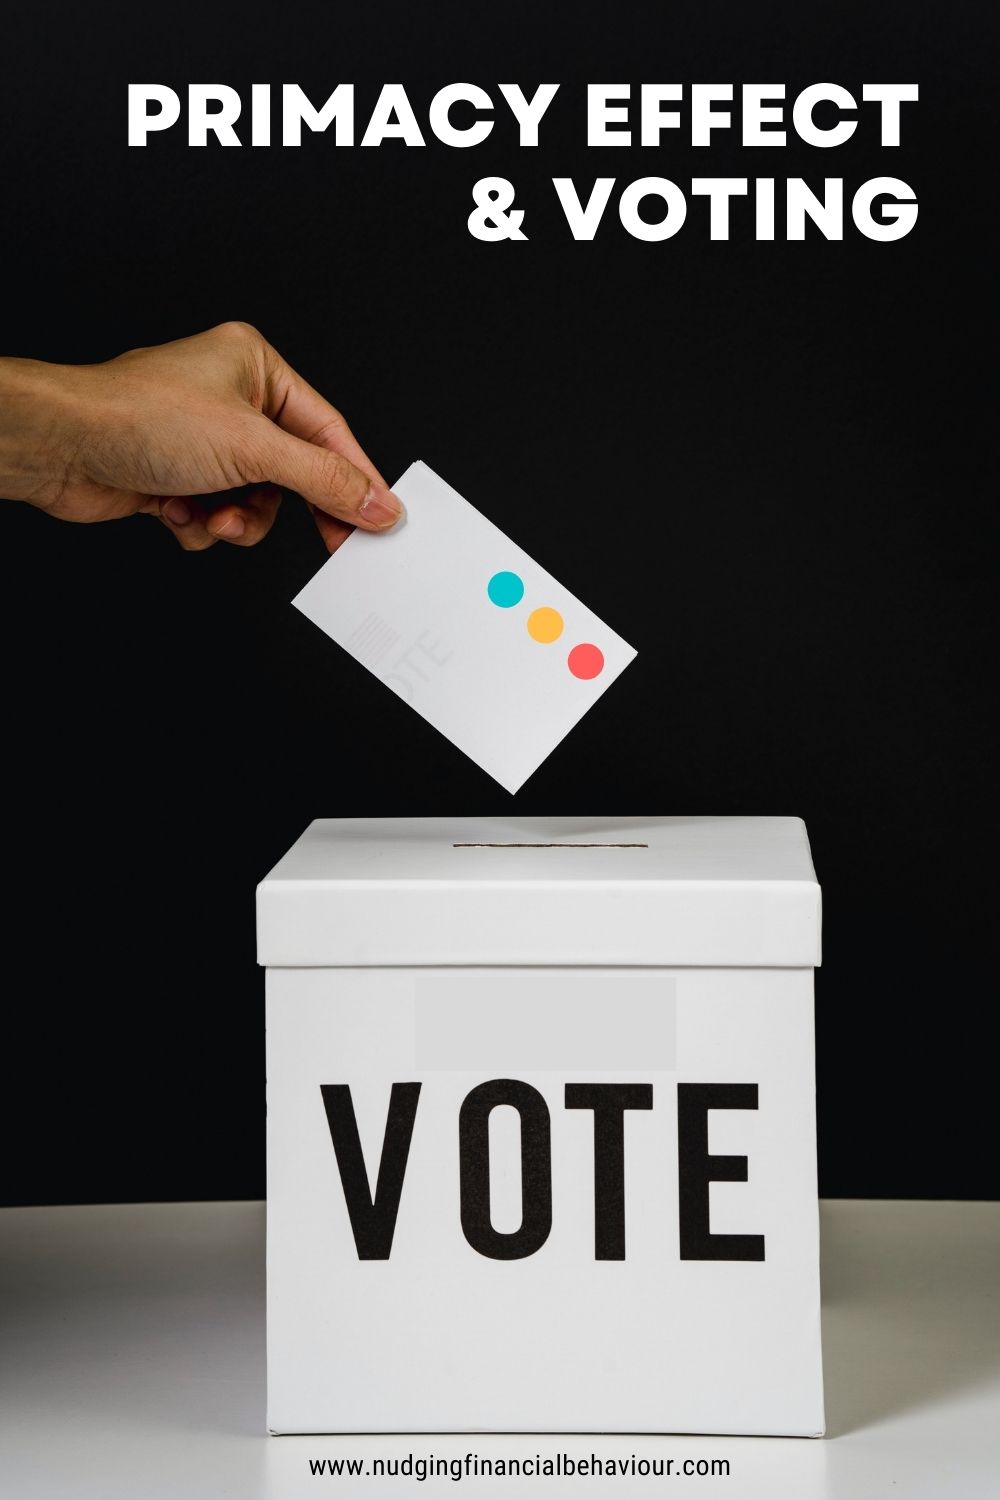 Primacy effect and voting - Primacy effect in psychology